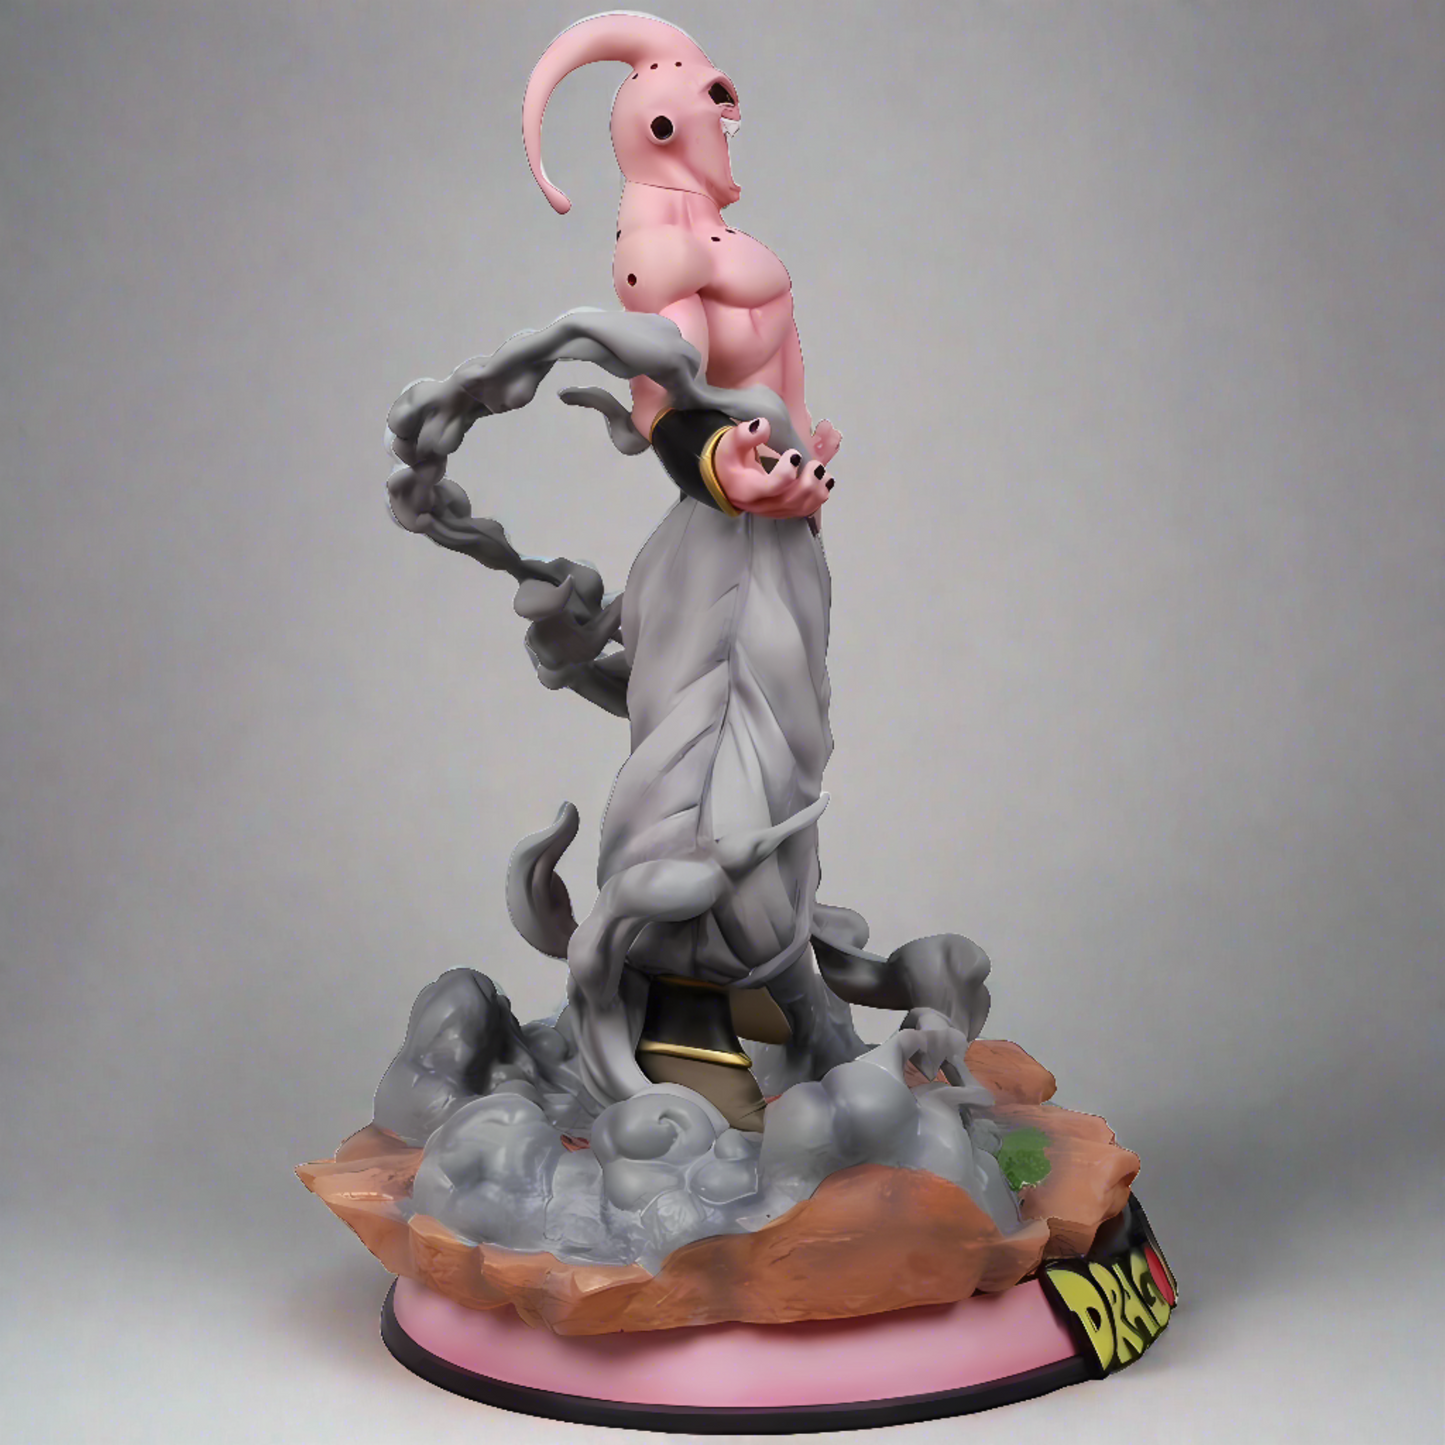 Majesty Majin-Buu figure captured in a dynamic pose with smoke-like tendrils swirling around, highlighting his pink skin and relaxed demeanor.